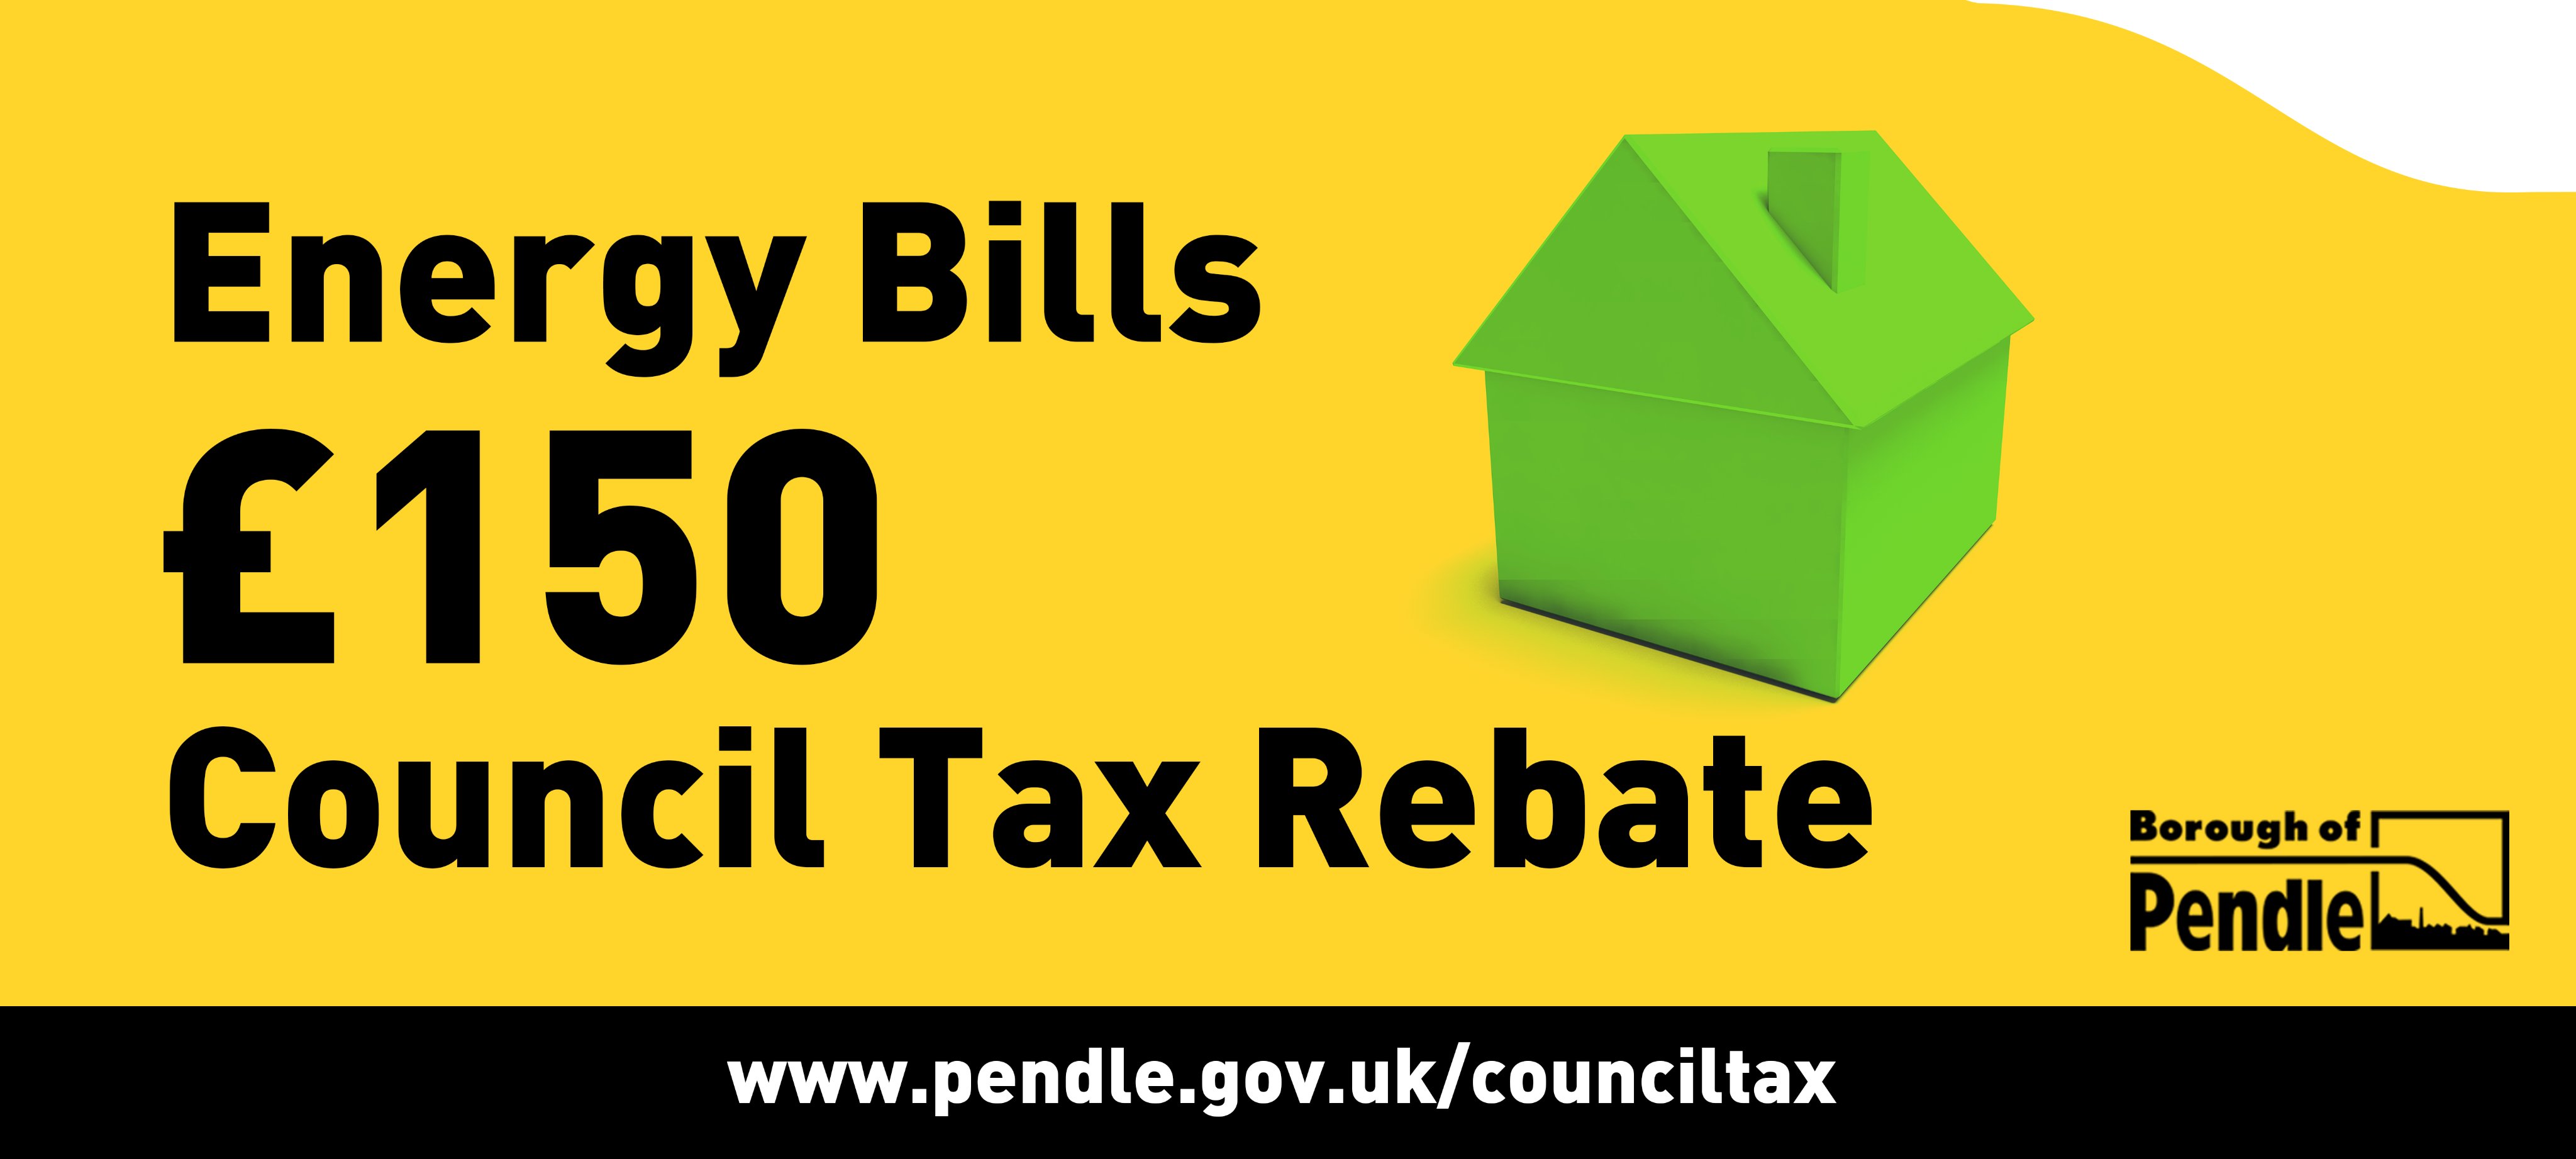 Thousands receive Council Tax Rebate in Pendle  